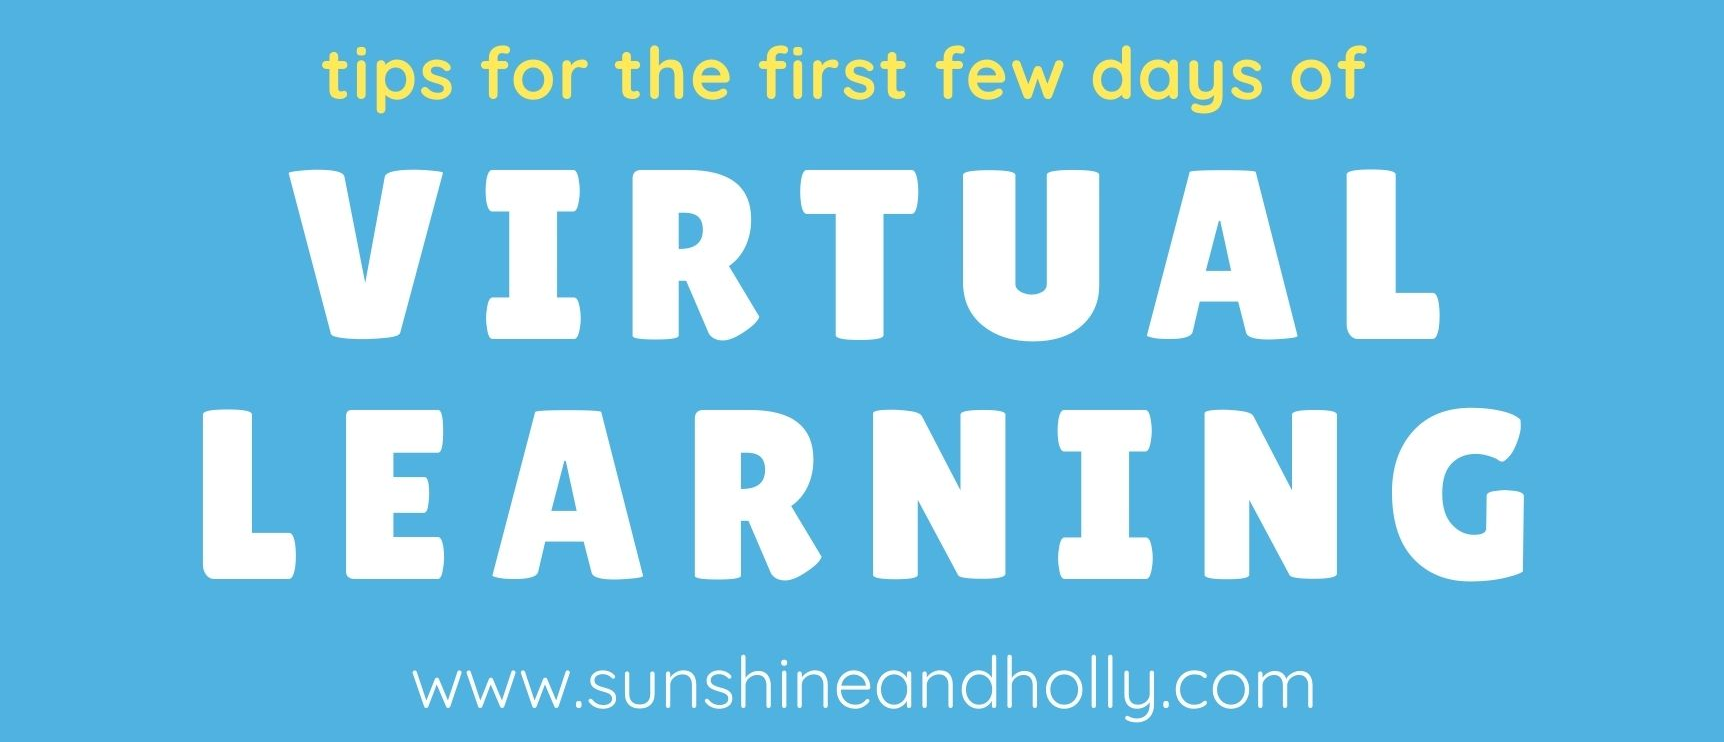 A Few Tips for the First Few Days of Virtual Learning | sunshineandholly.com | distance learning